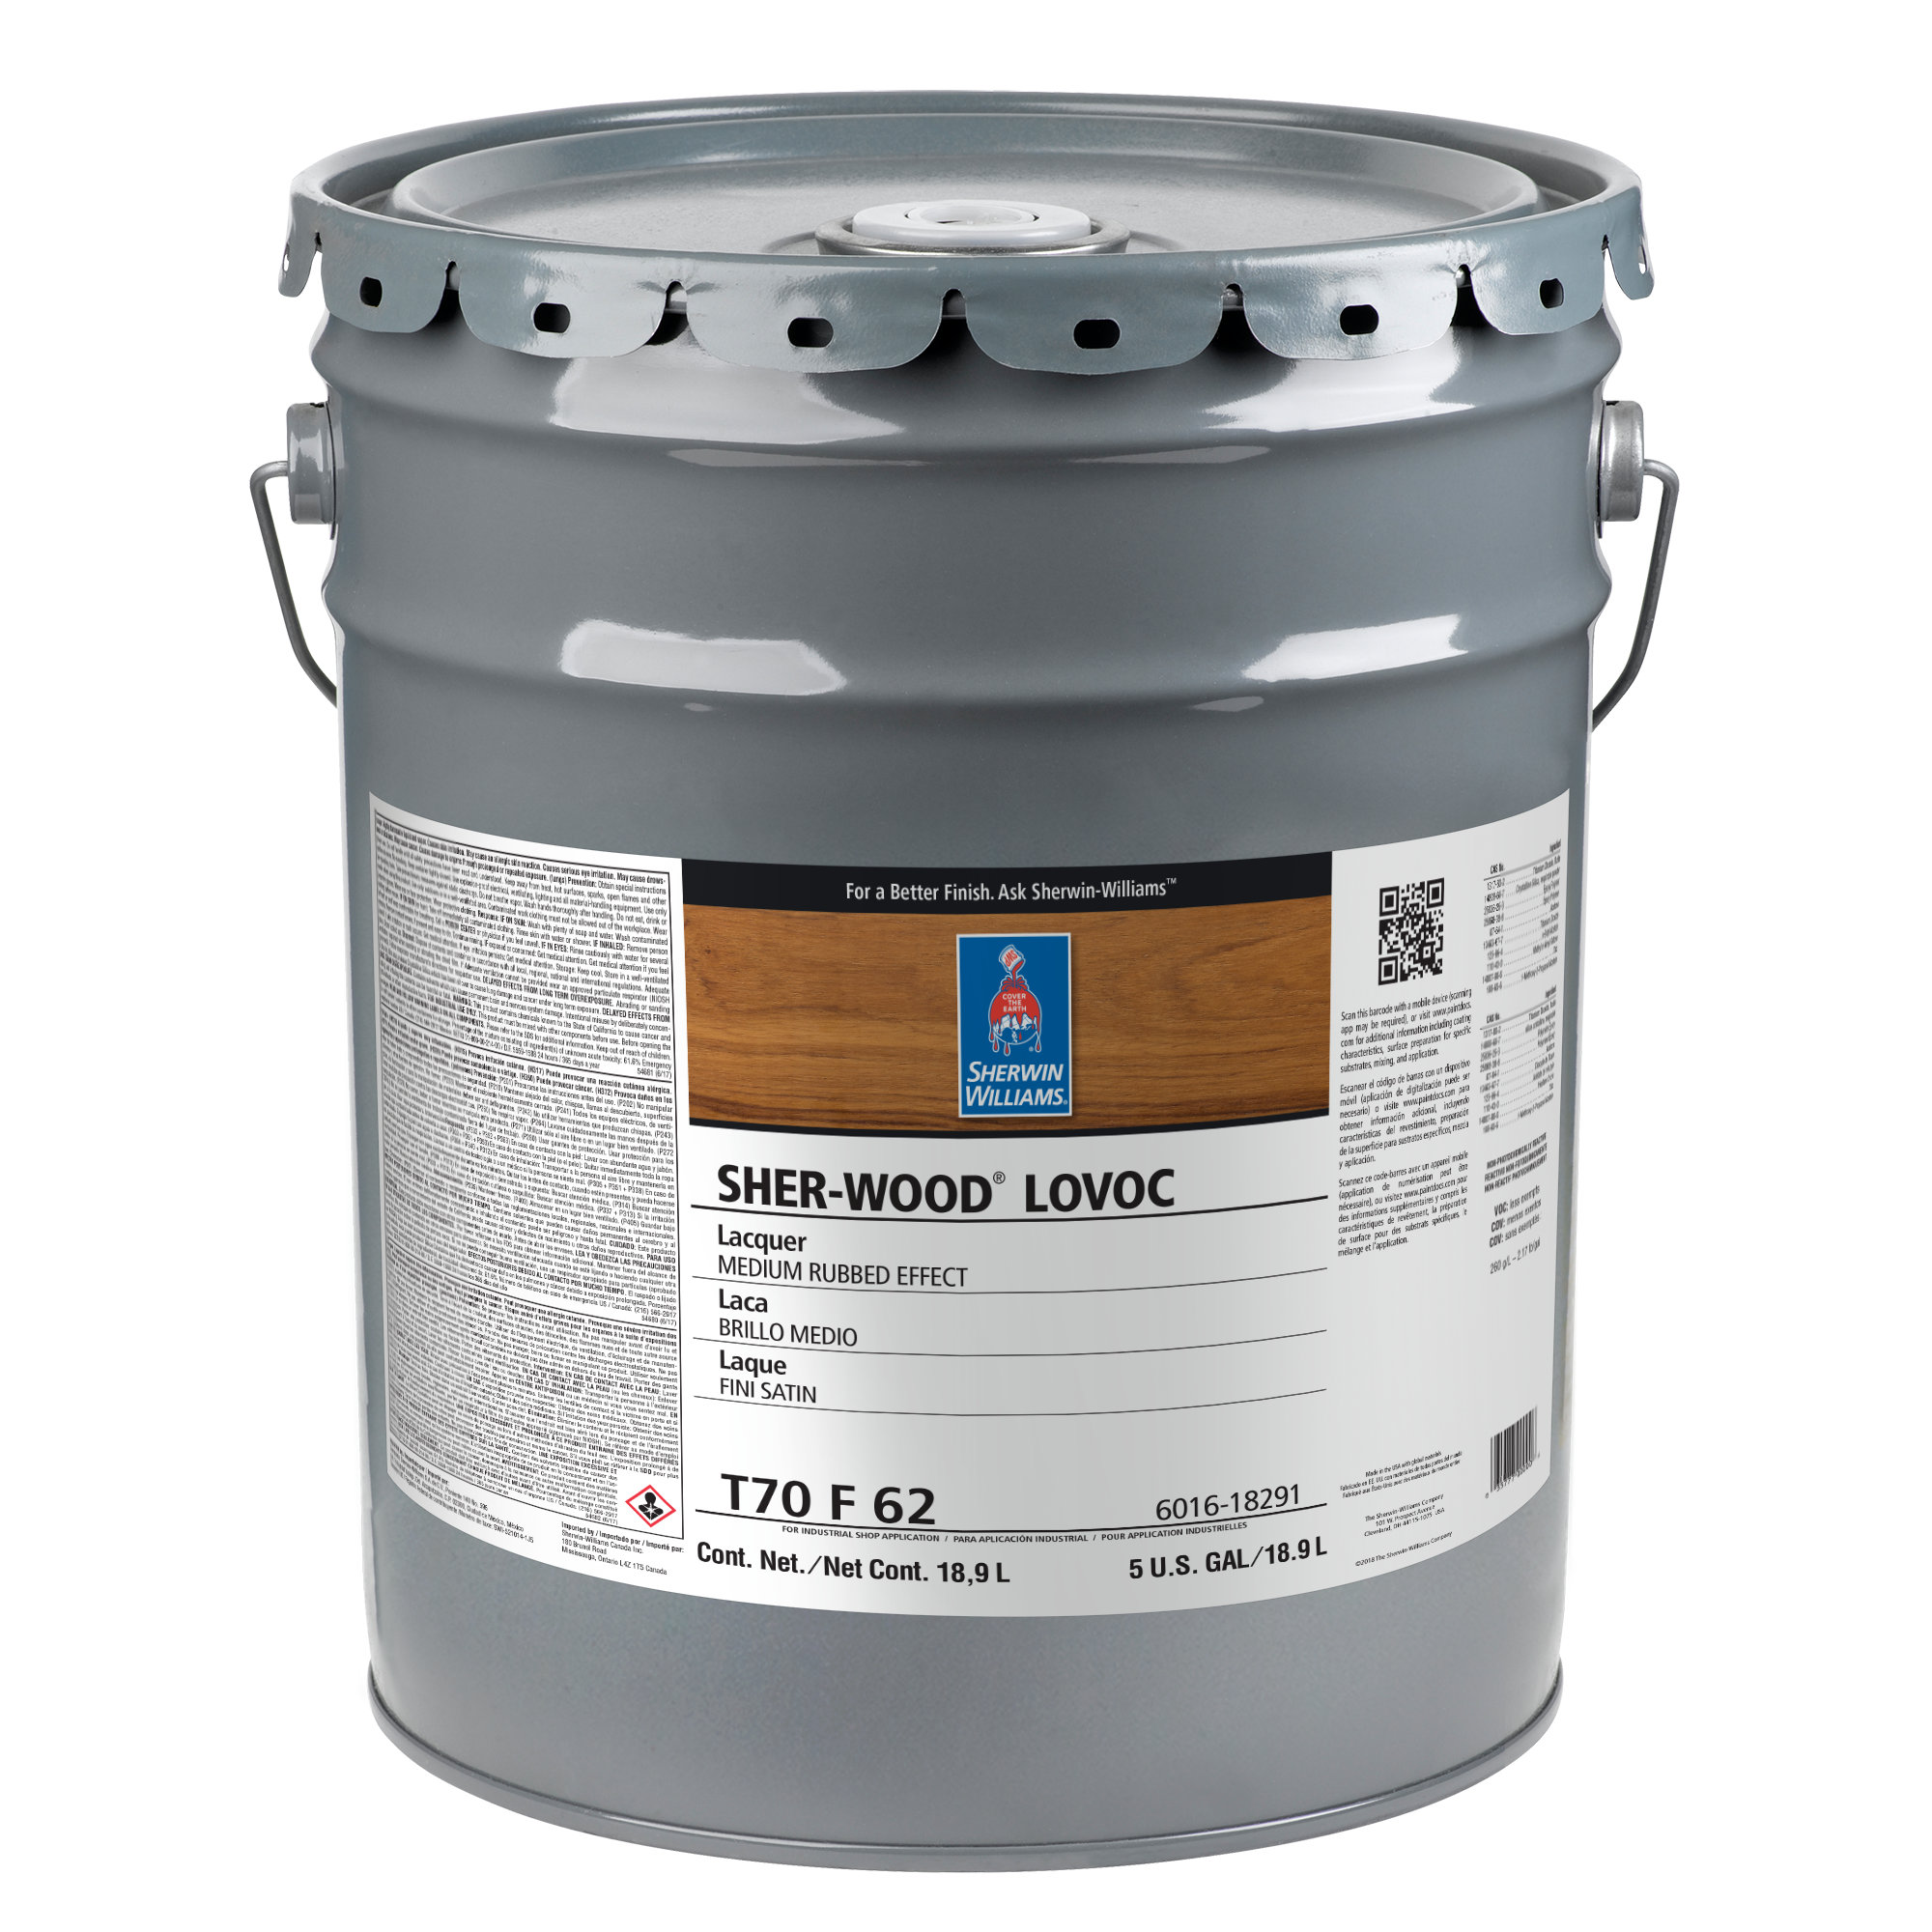 SHER-WOOD Low VOC Lacquer